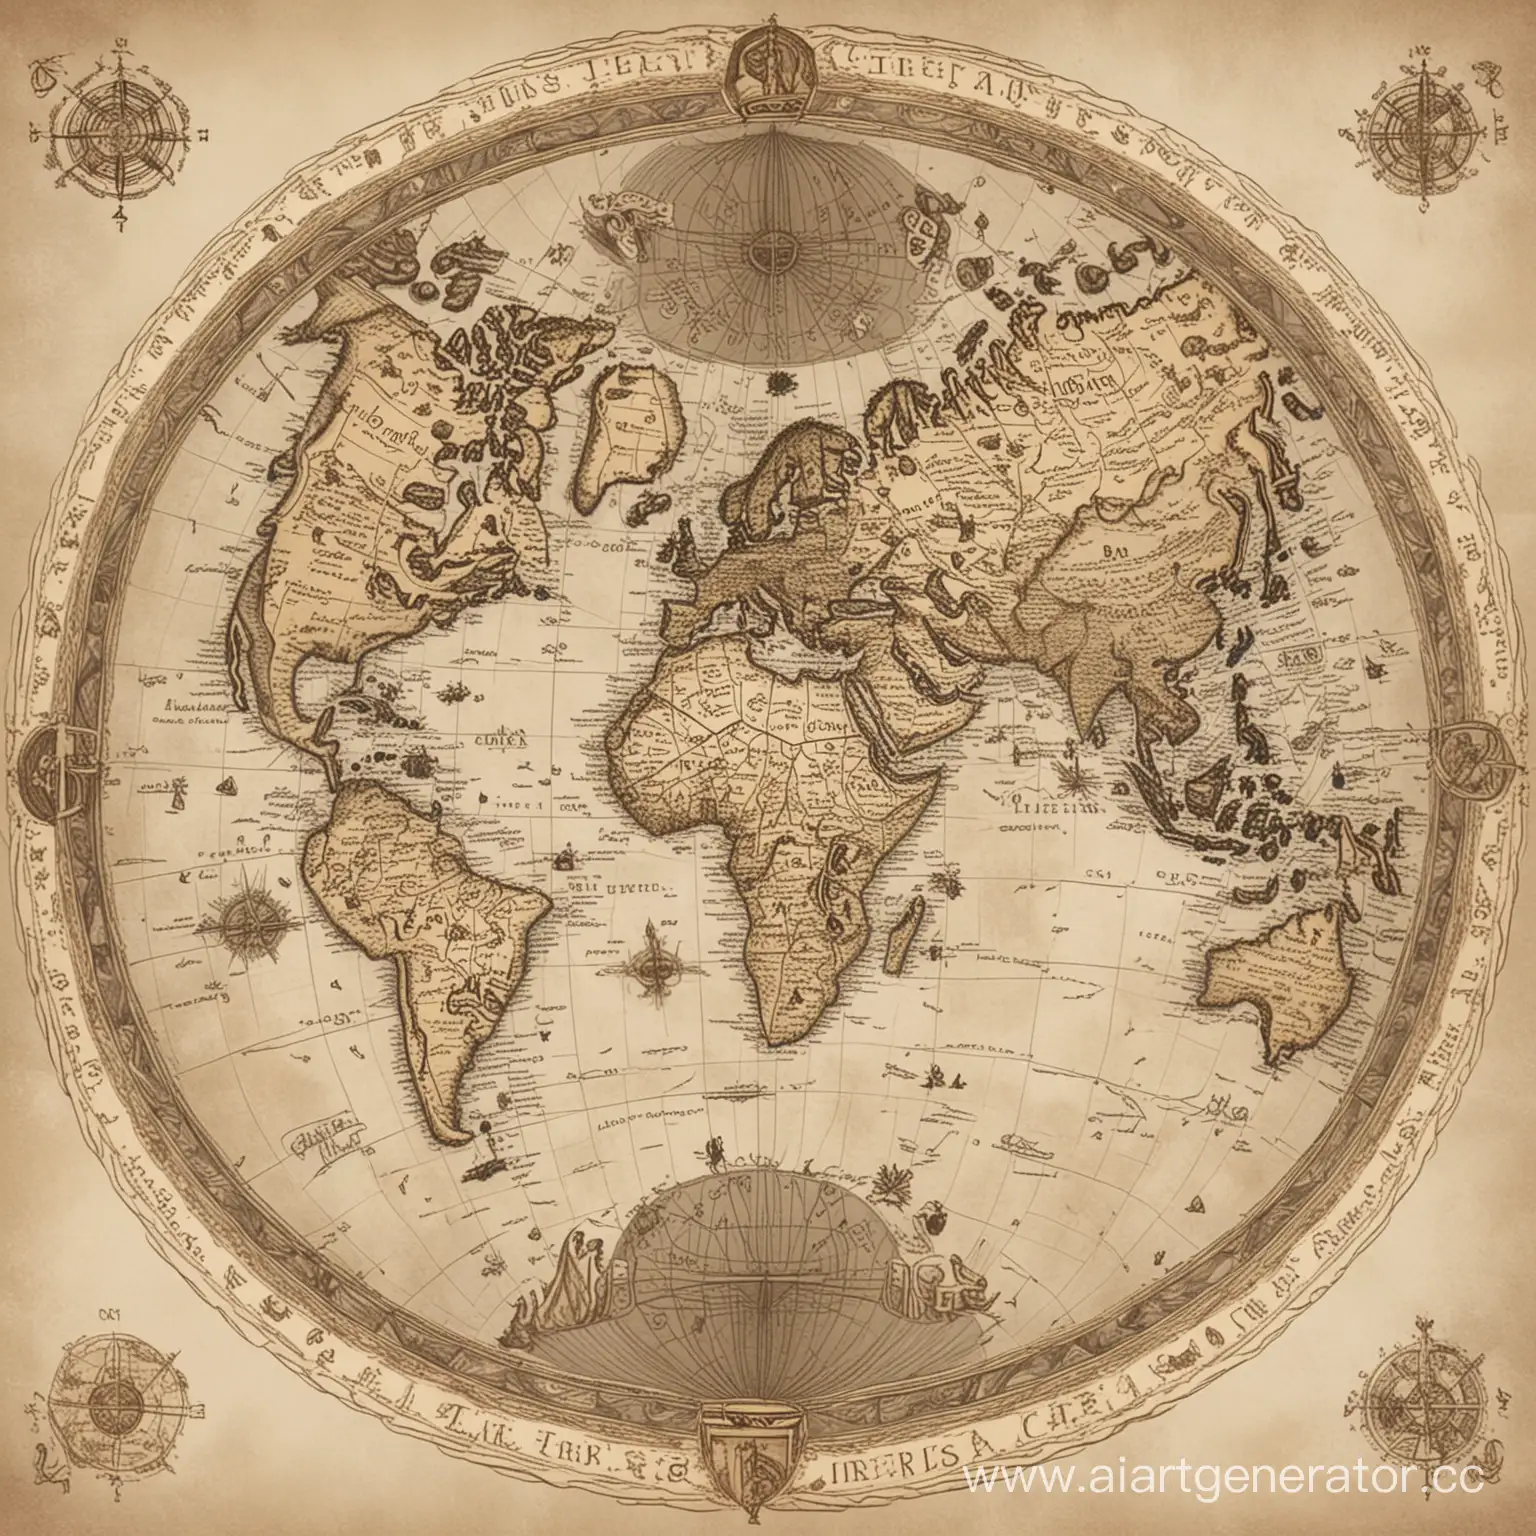 Medieval-Style-Round-Globe-Map-in-GrayBeige-Tones